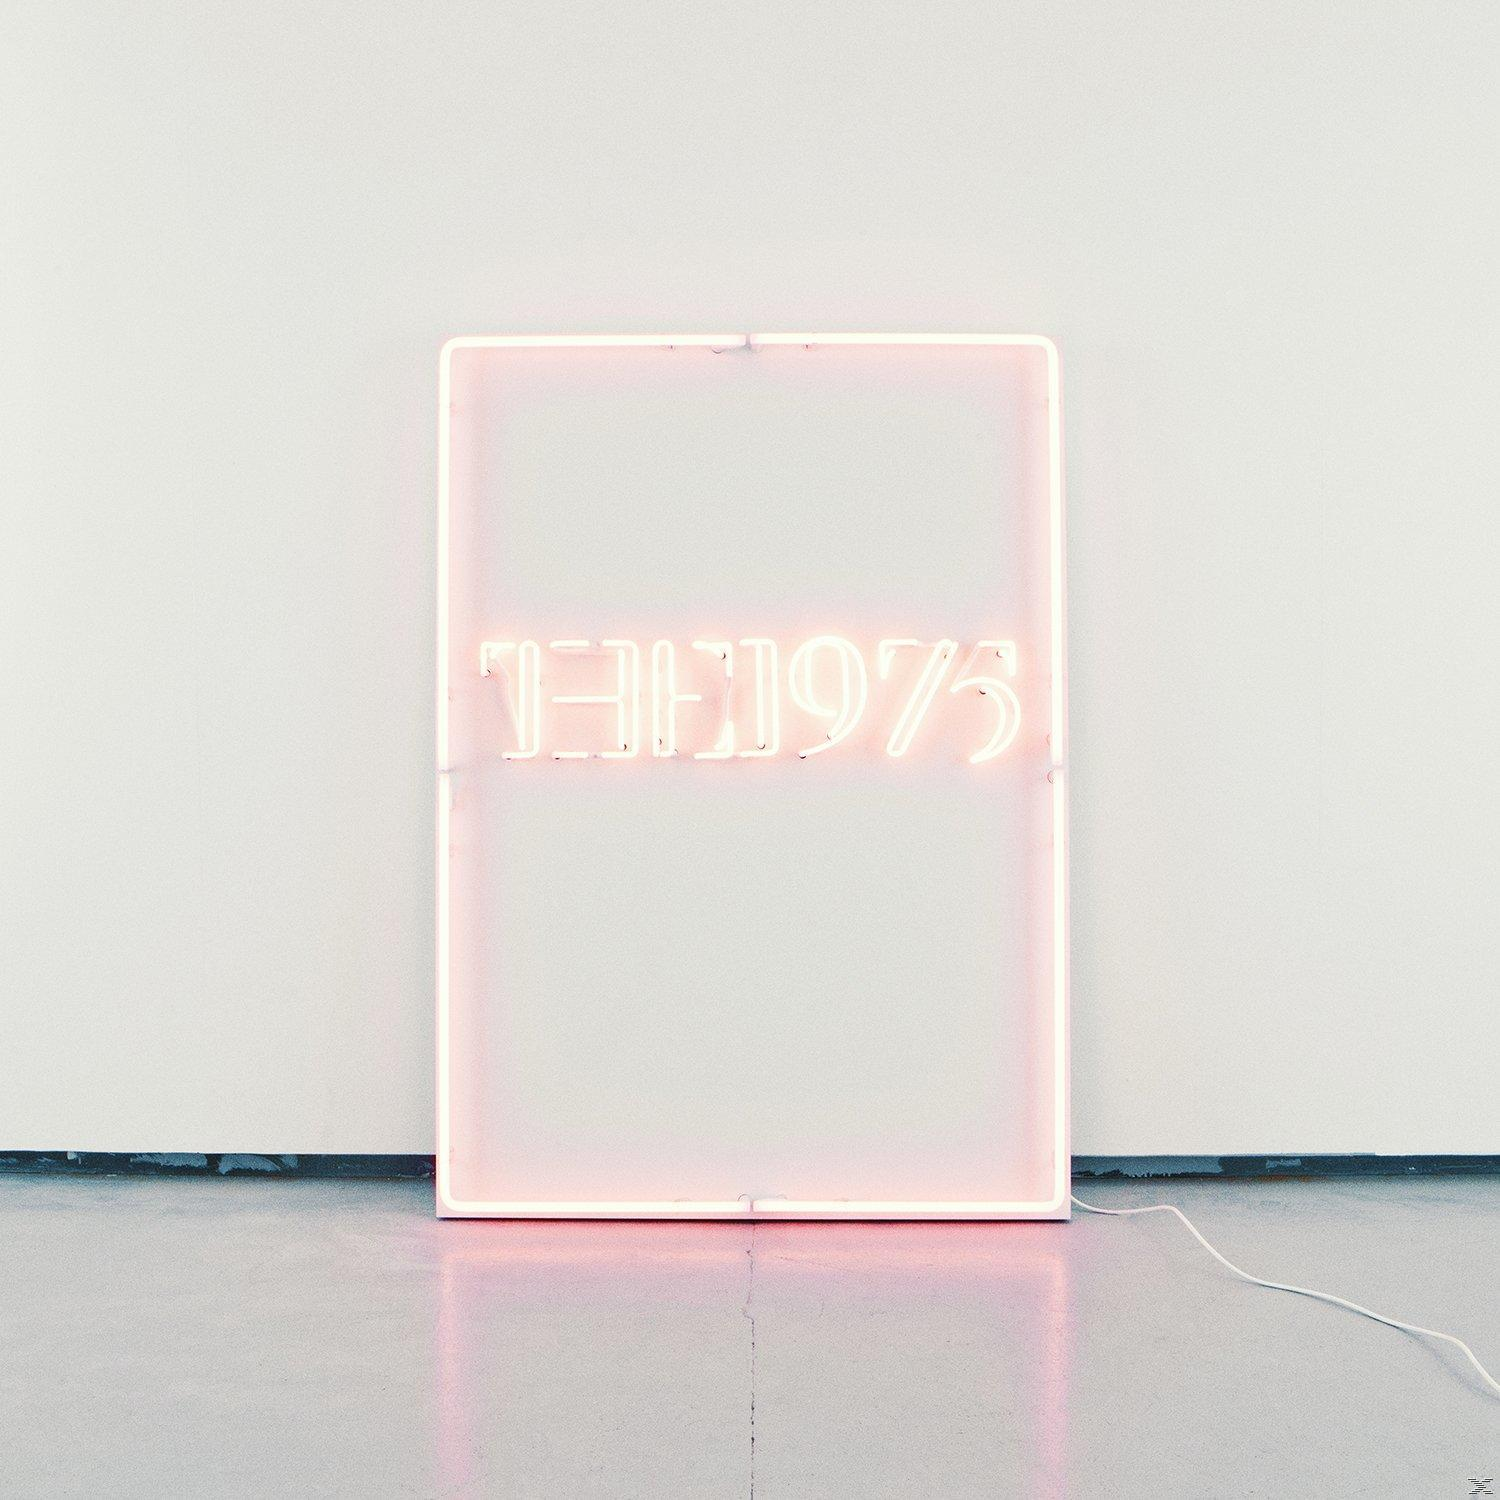 The 1975 - I Of So You (Vinyl) You When So Sleep, - Yet Beautiful Are Unaware It For It Like